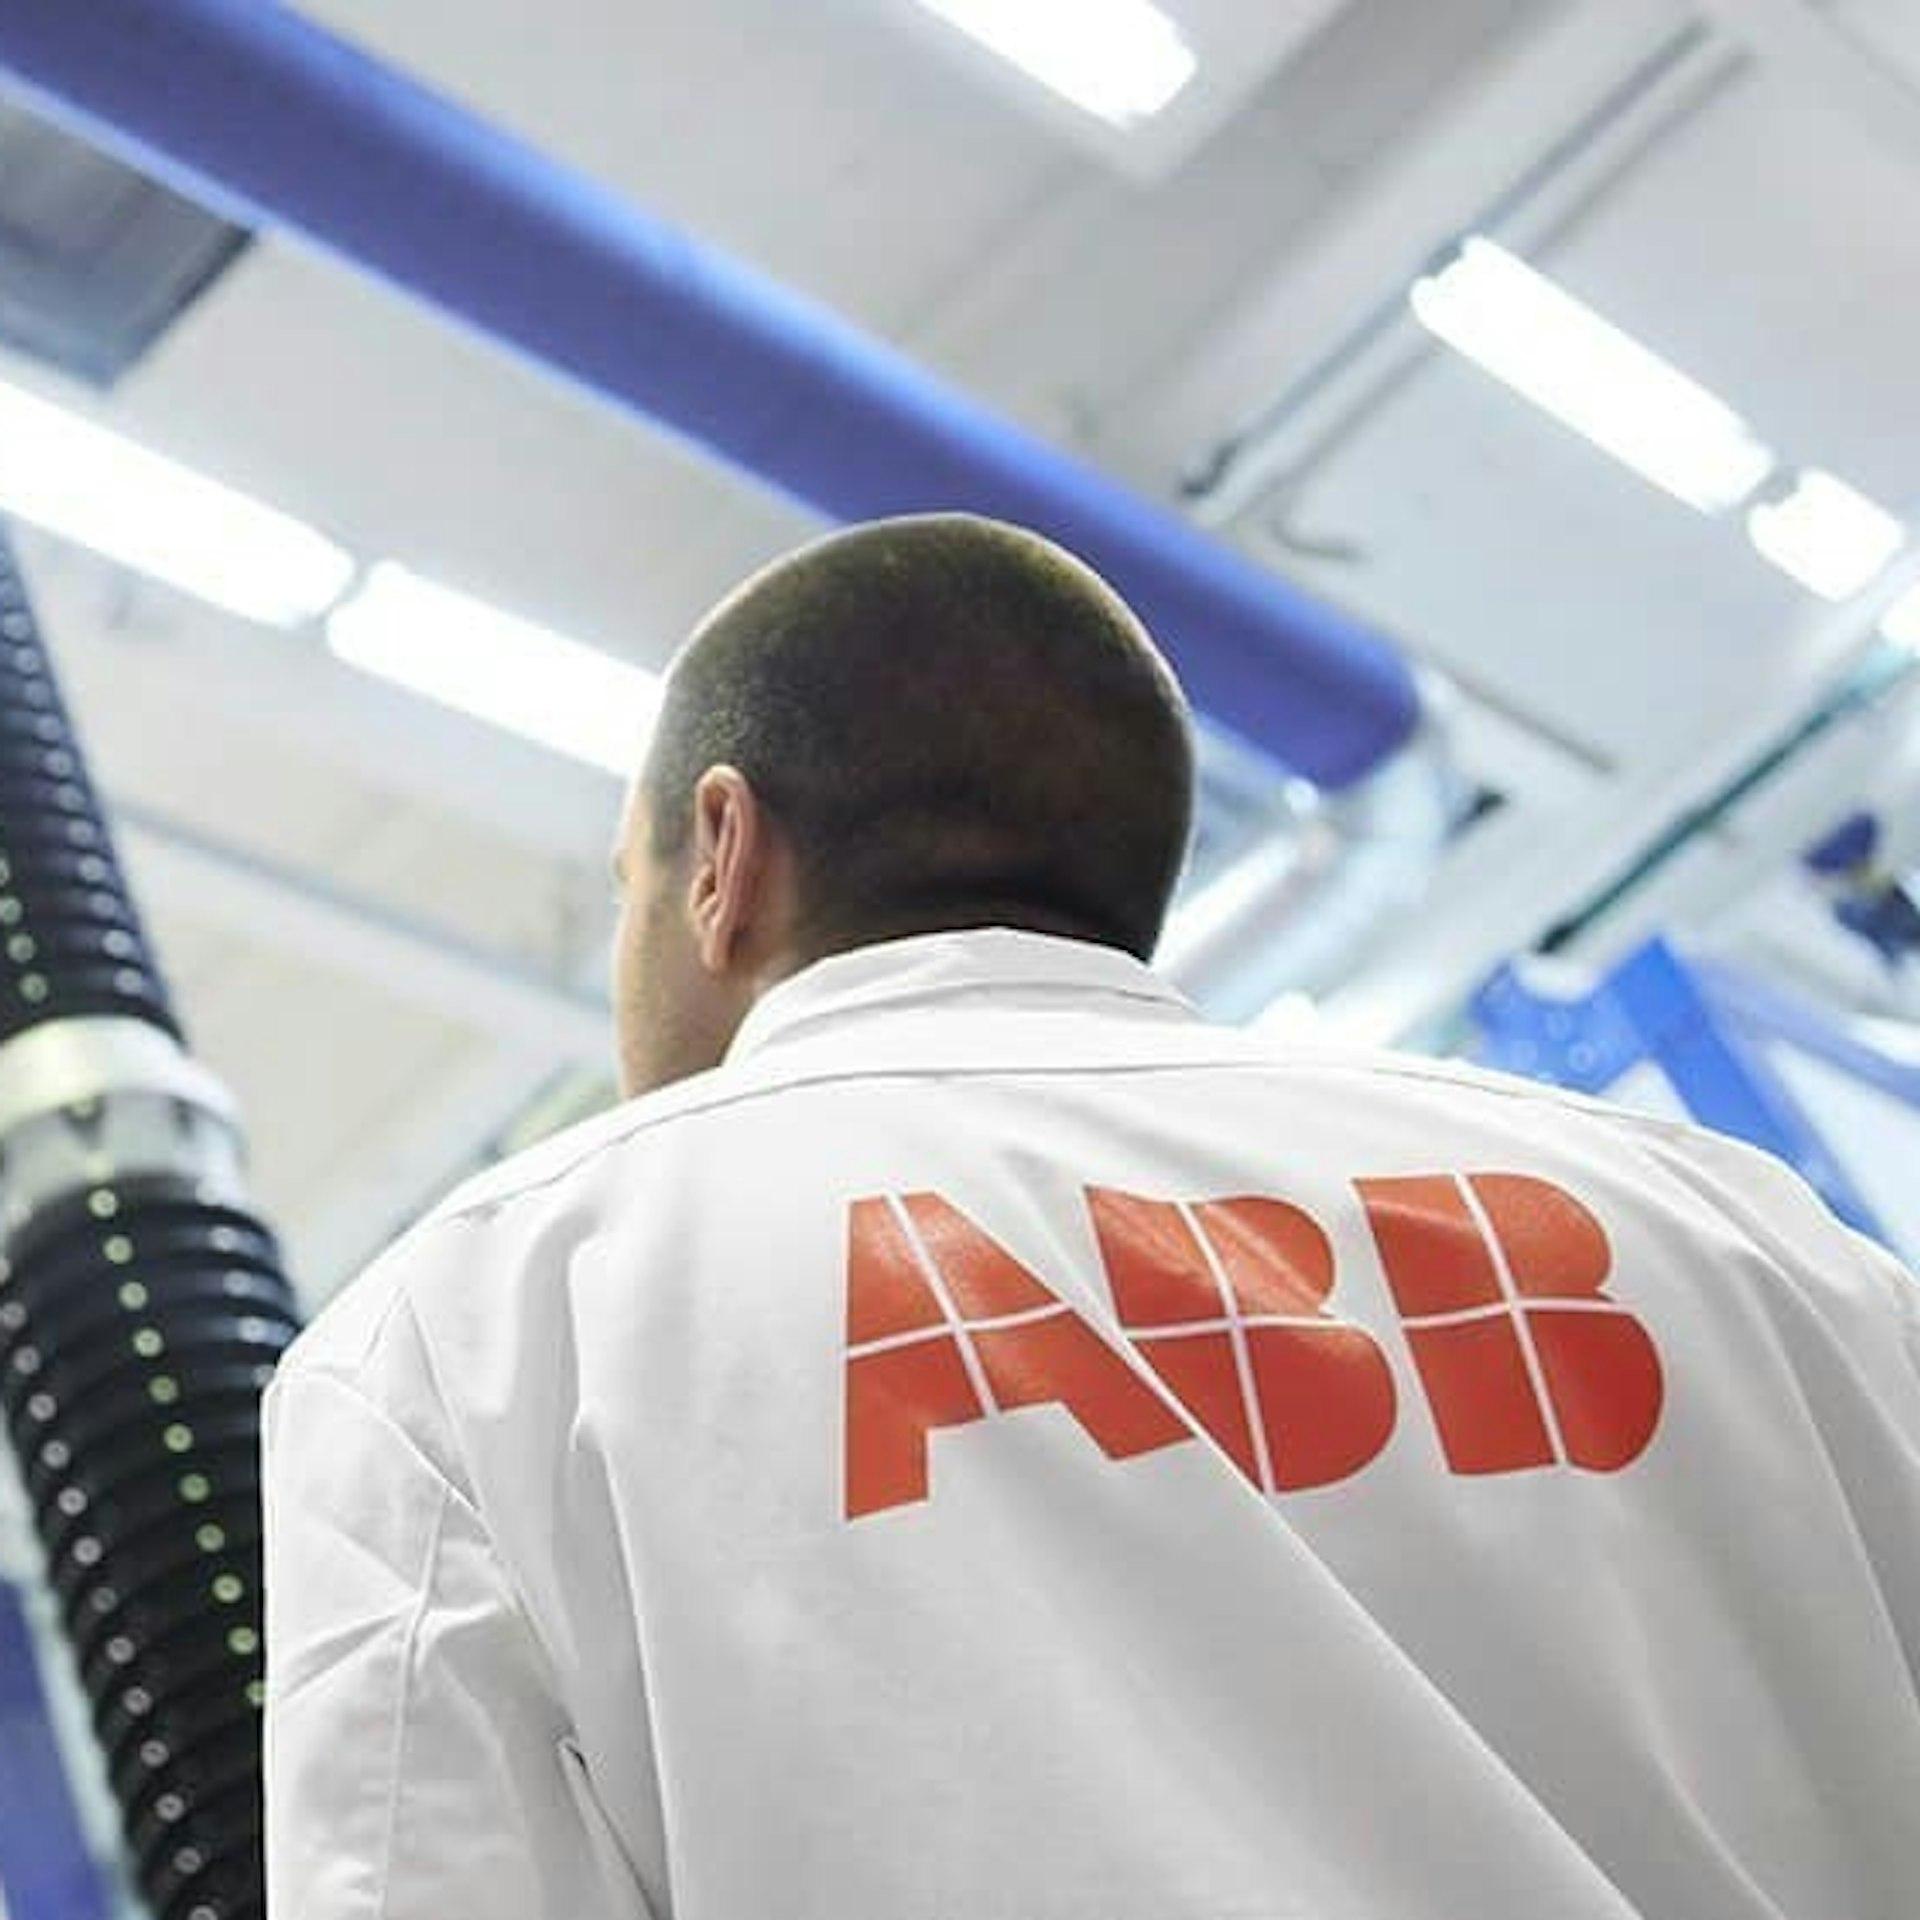 ABB Spain have been using Pagero’s services since 2011 to send and receive e-invoices, which has helped them optimize their invoice handling.